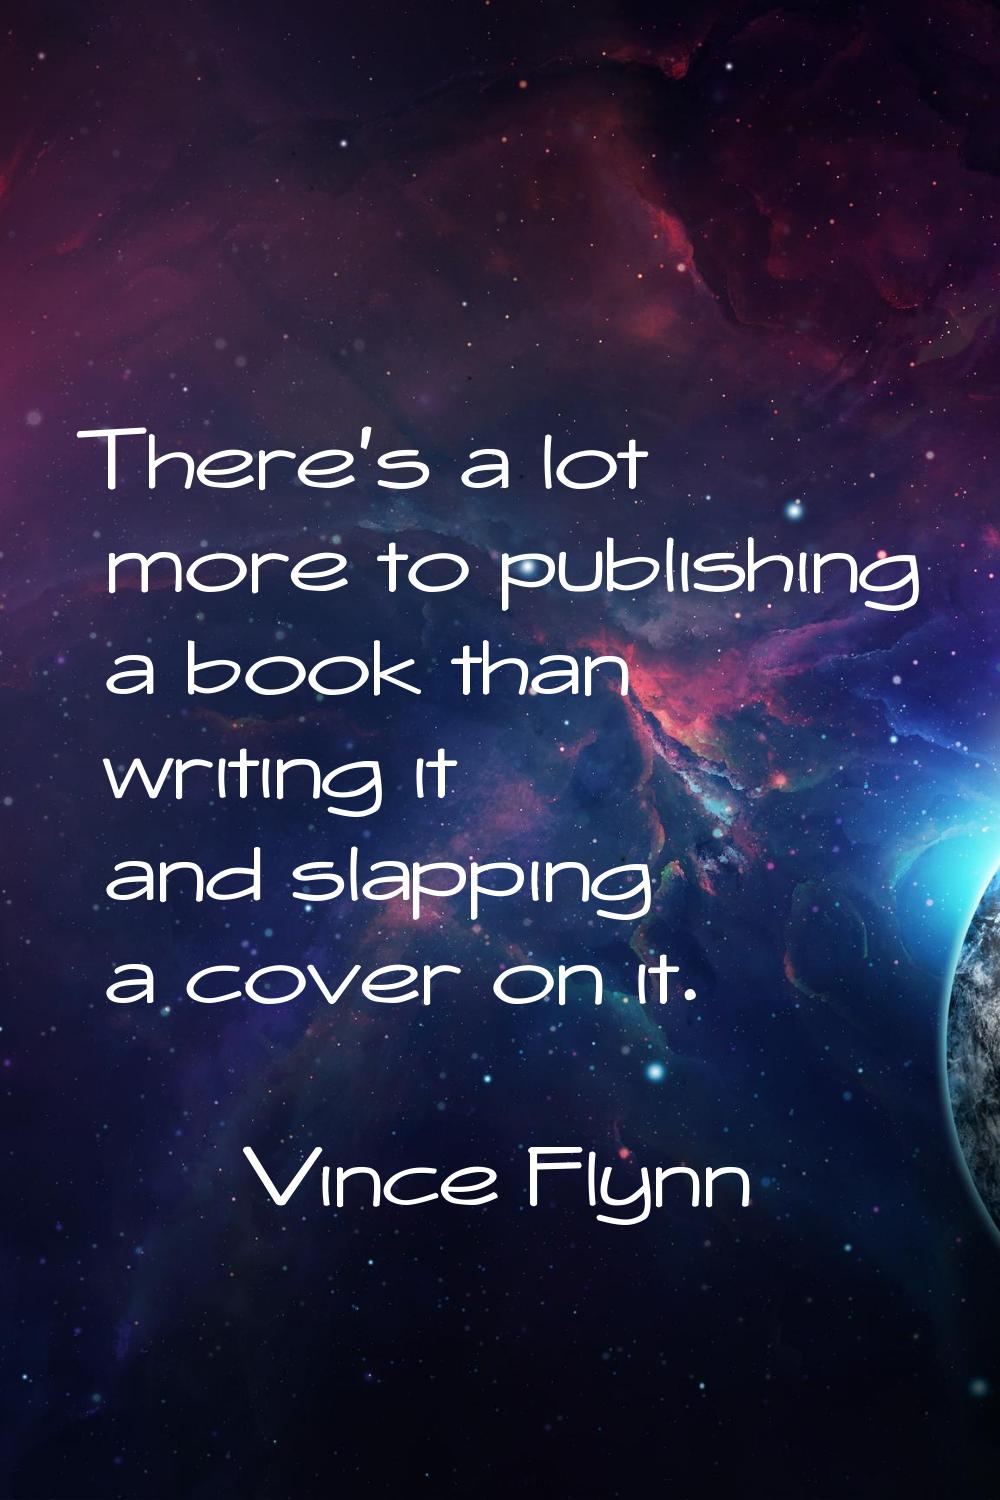 There's a lot more to publishing a book than writing it and slapping a cover on it.